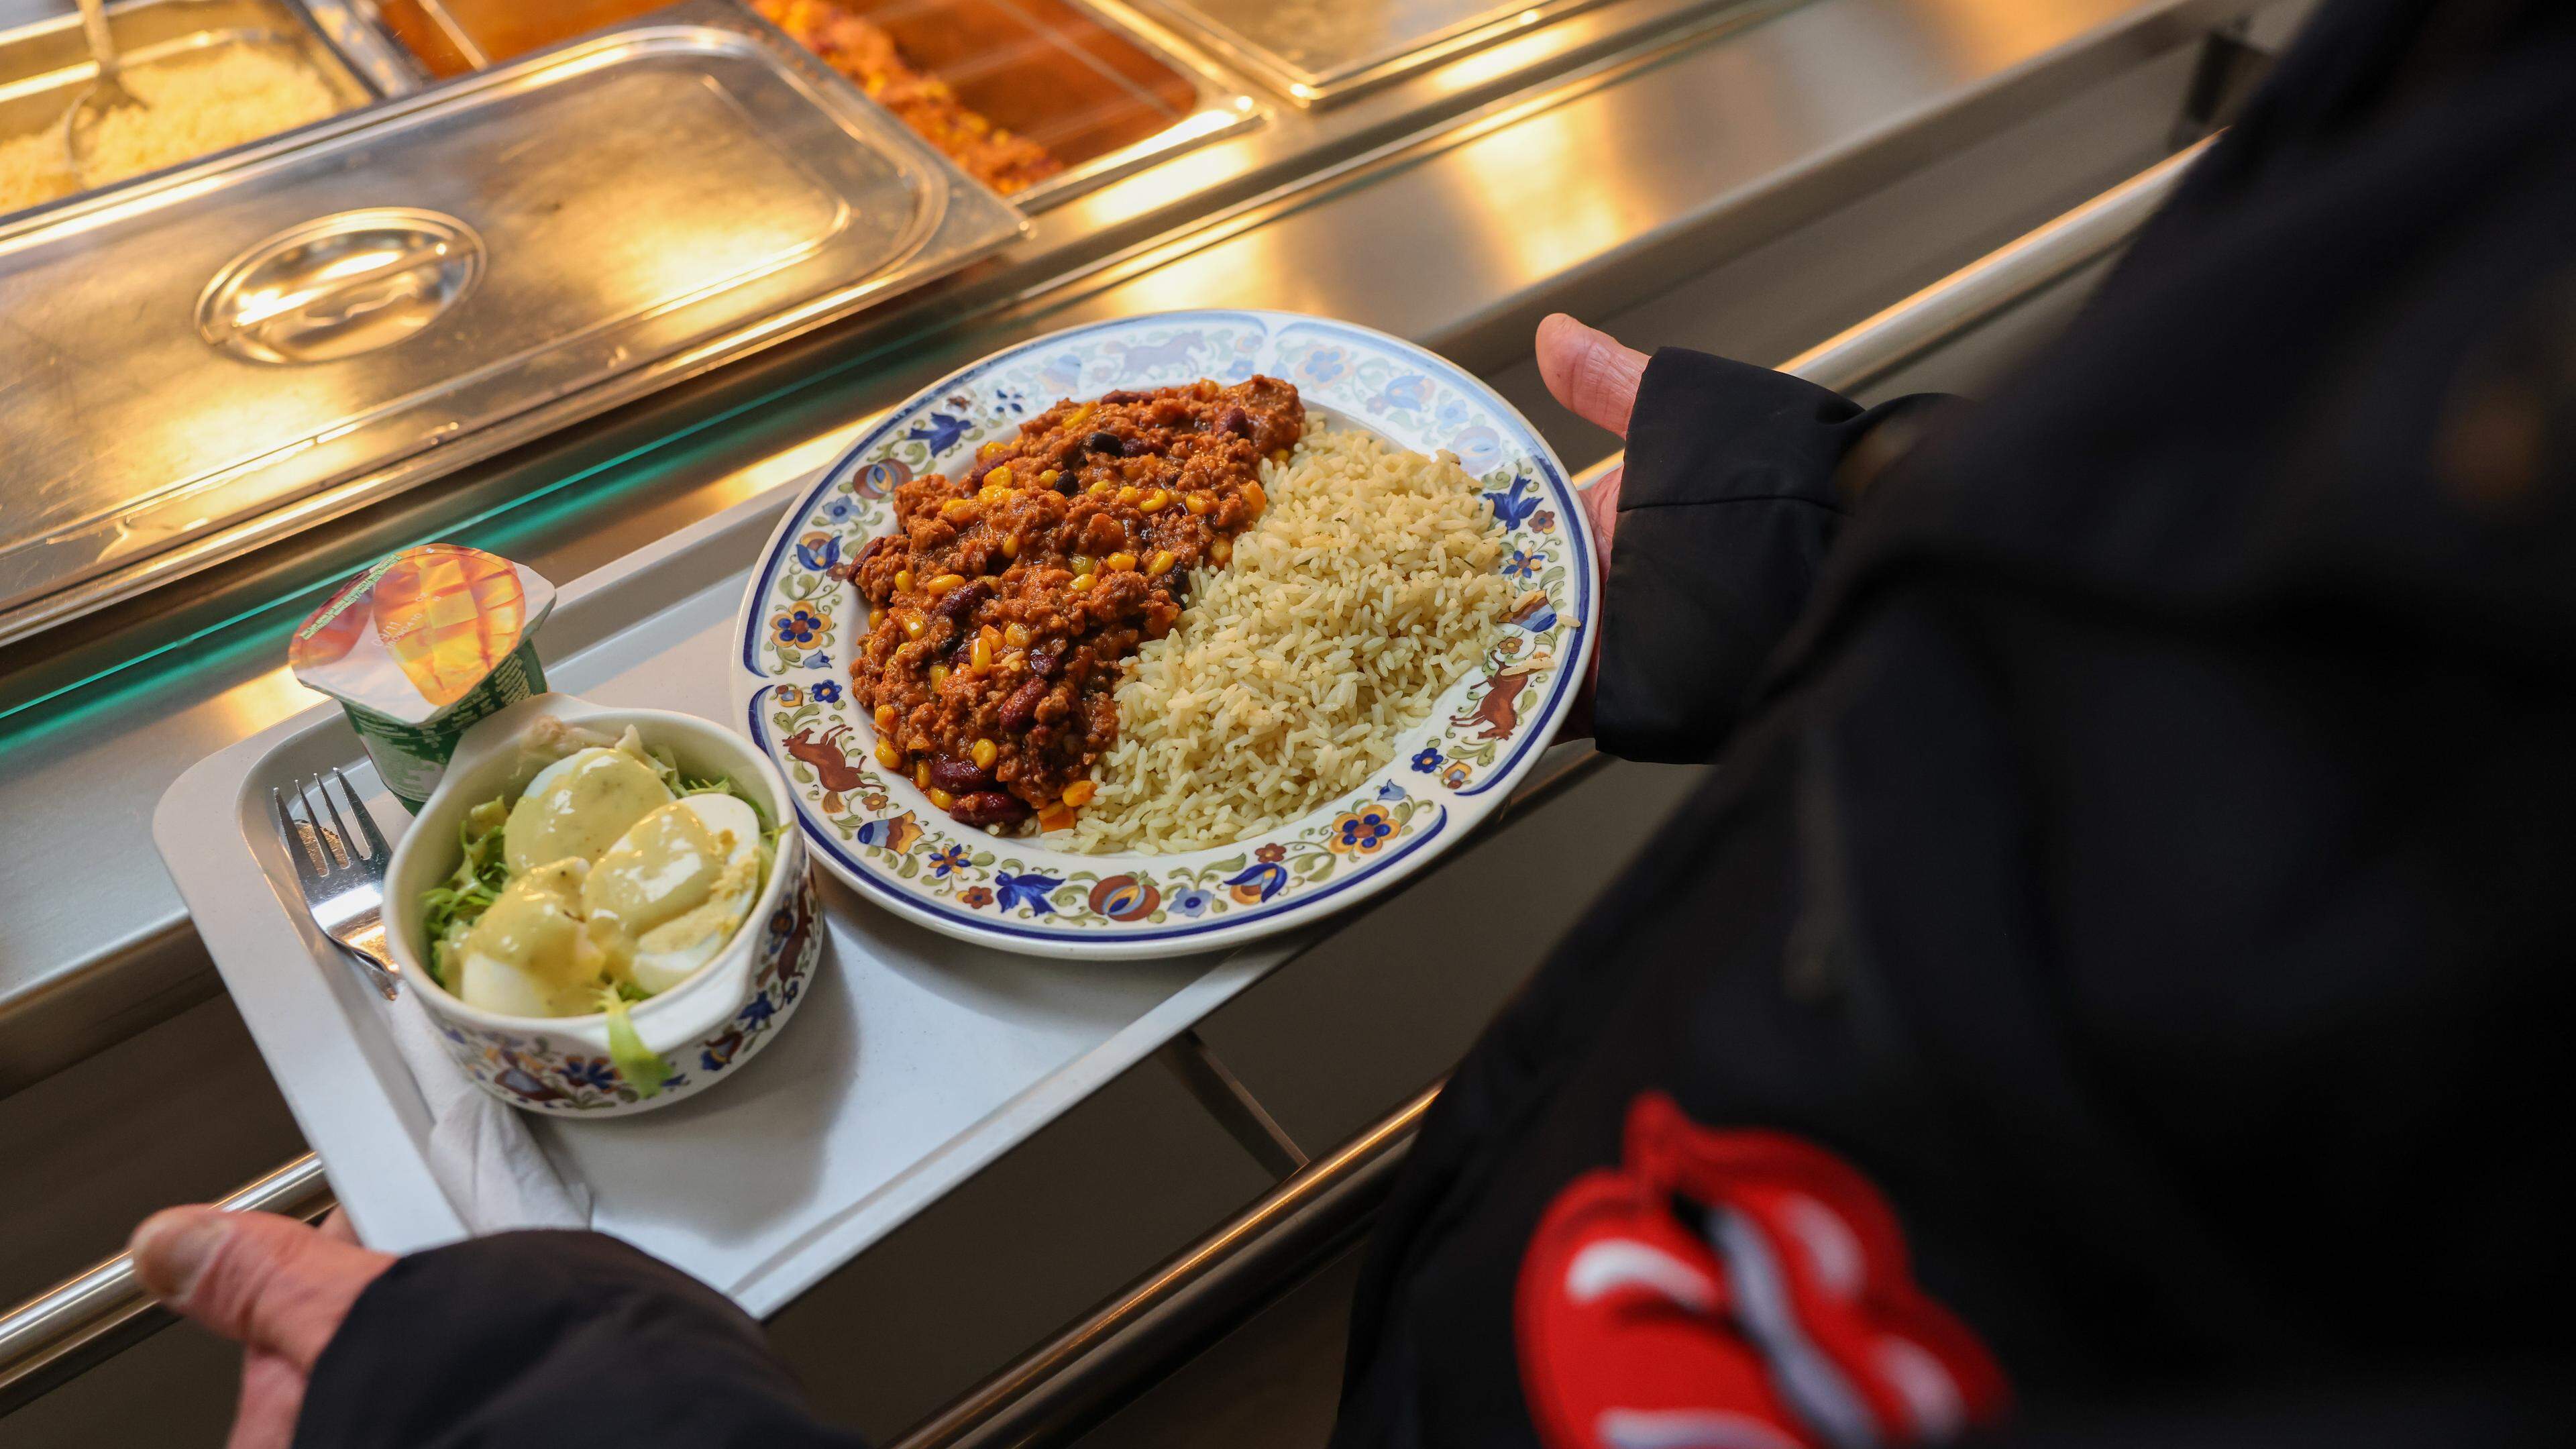 There has been a surge in people seeking a hot meal at Stëmm vun der Strooss in Hollerich